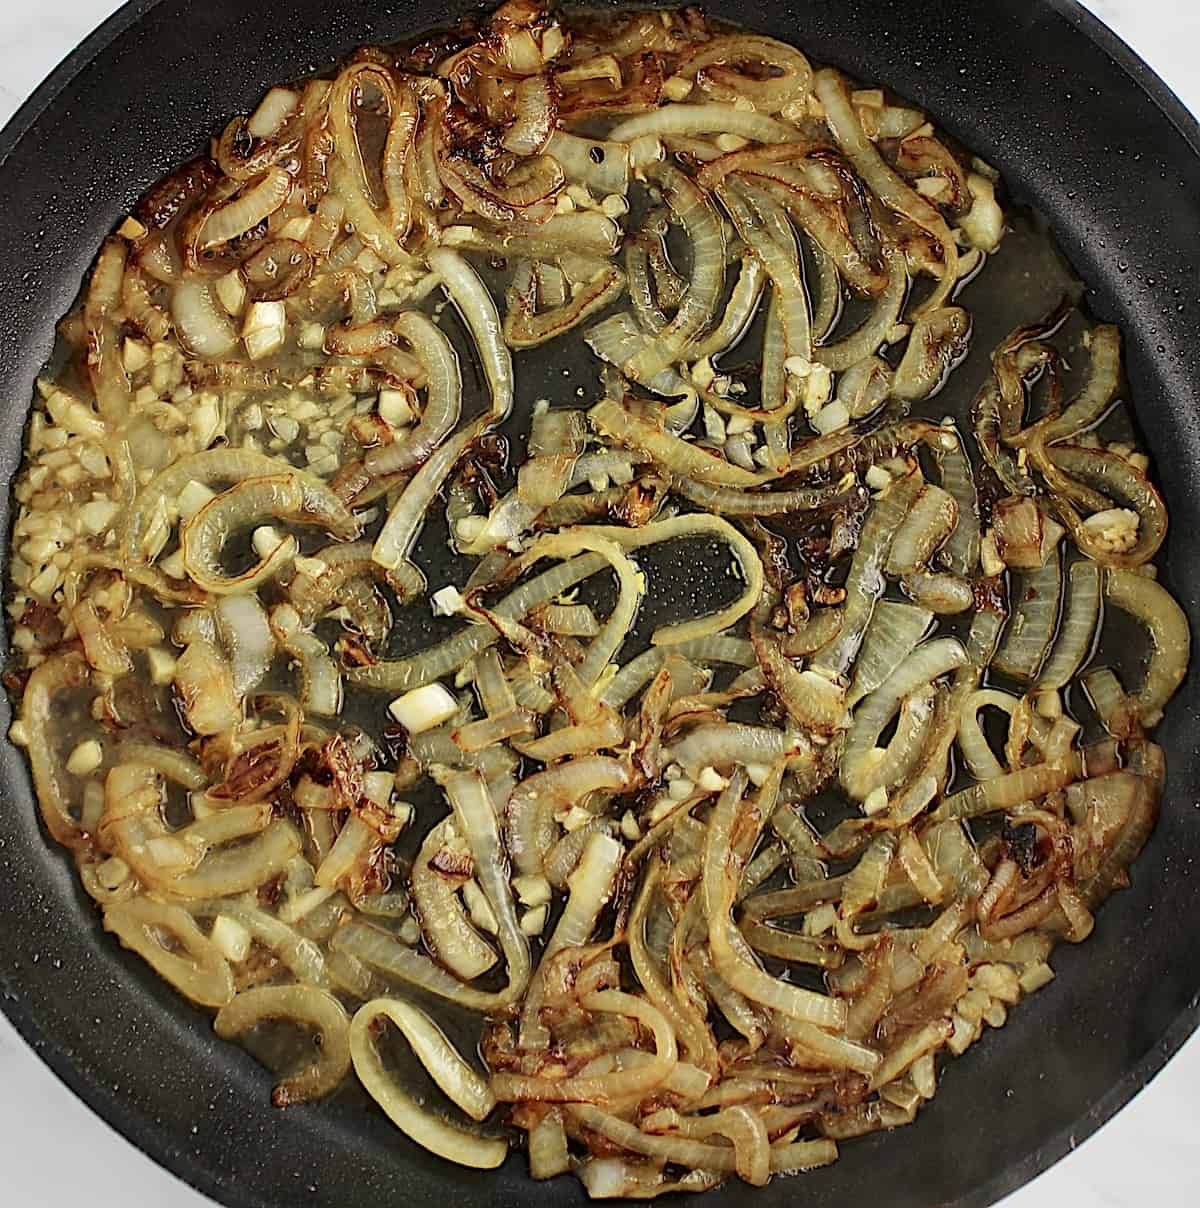 caramelized onions with chicken broth in skillet